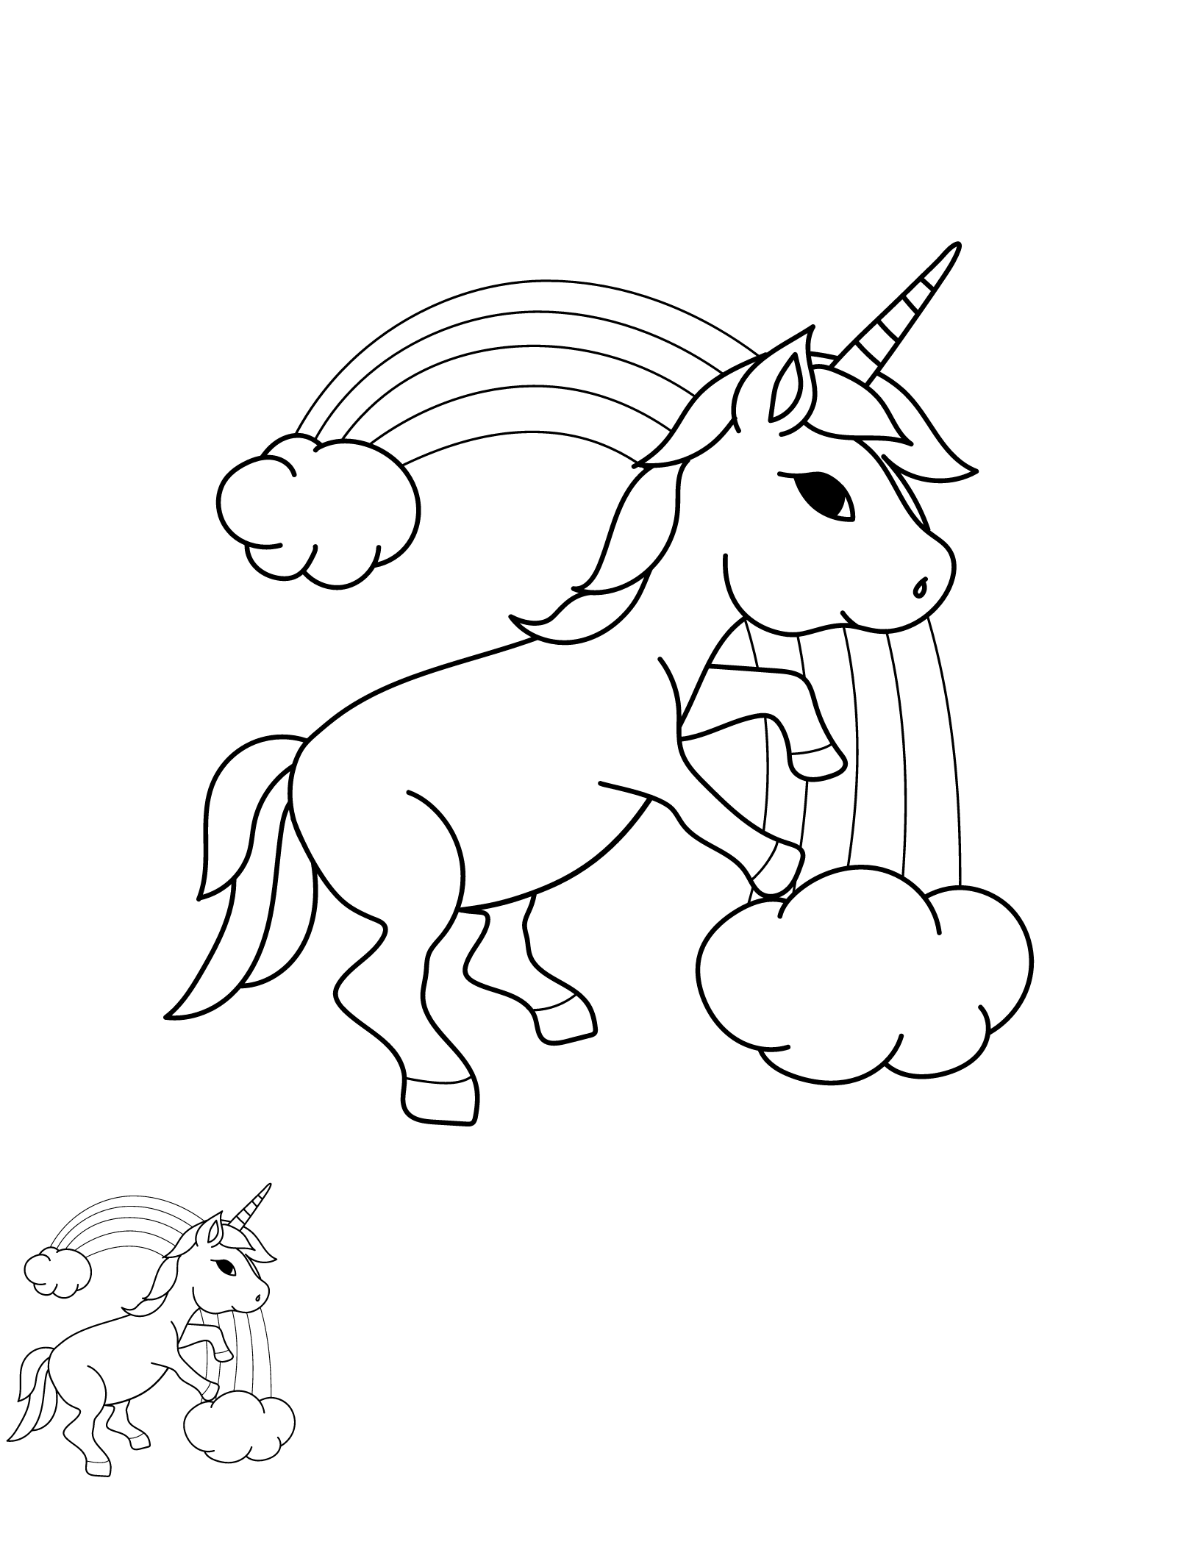 Free Rainbow Unicorn Coloring Page Template